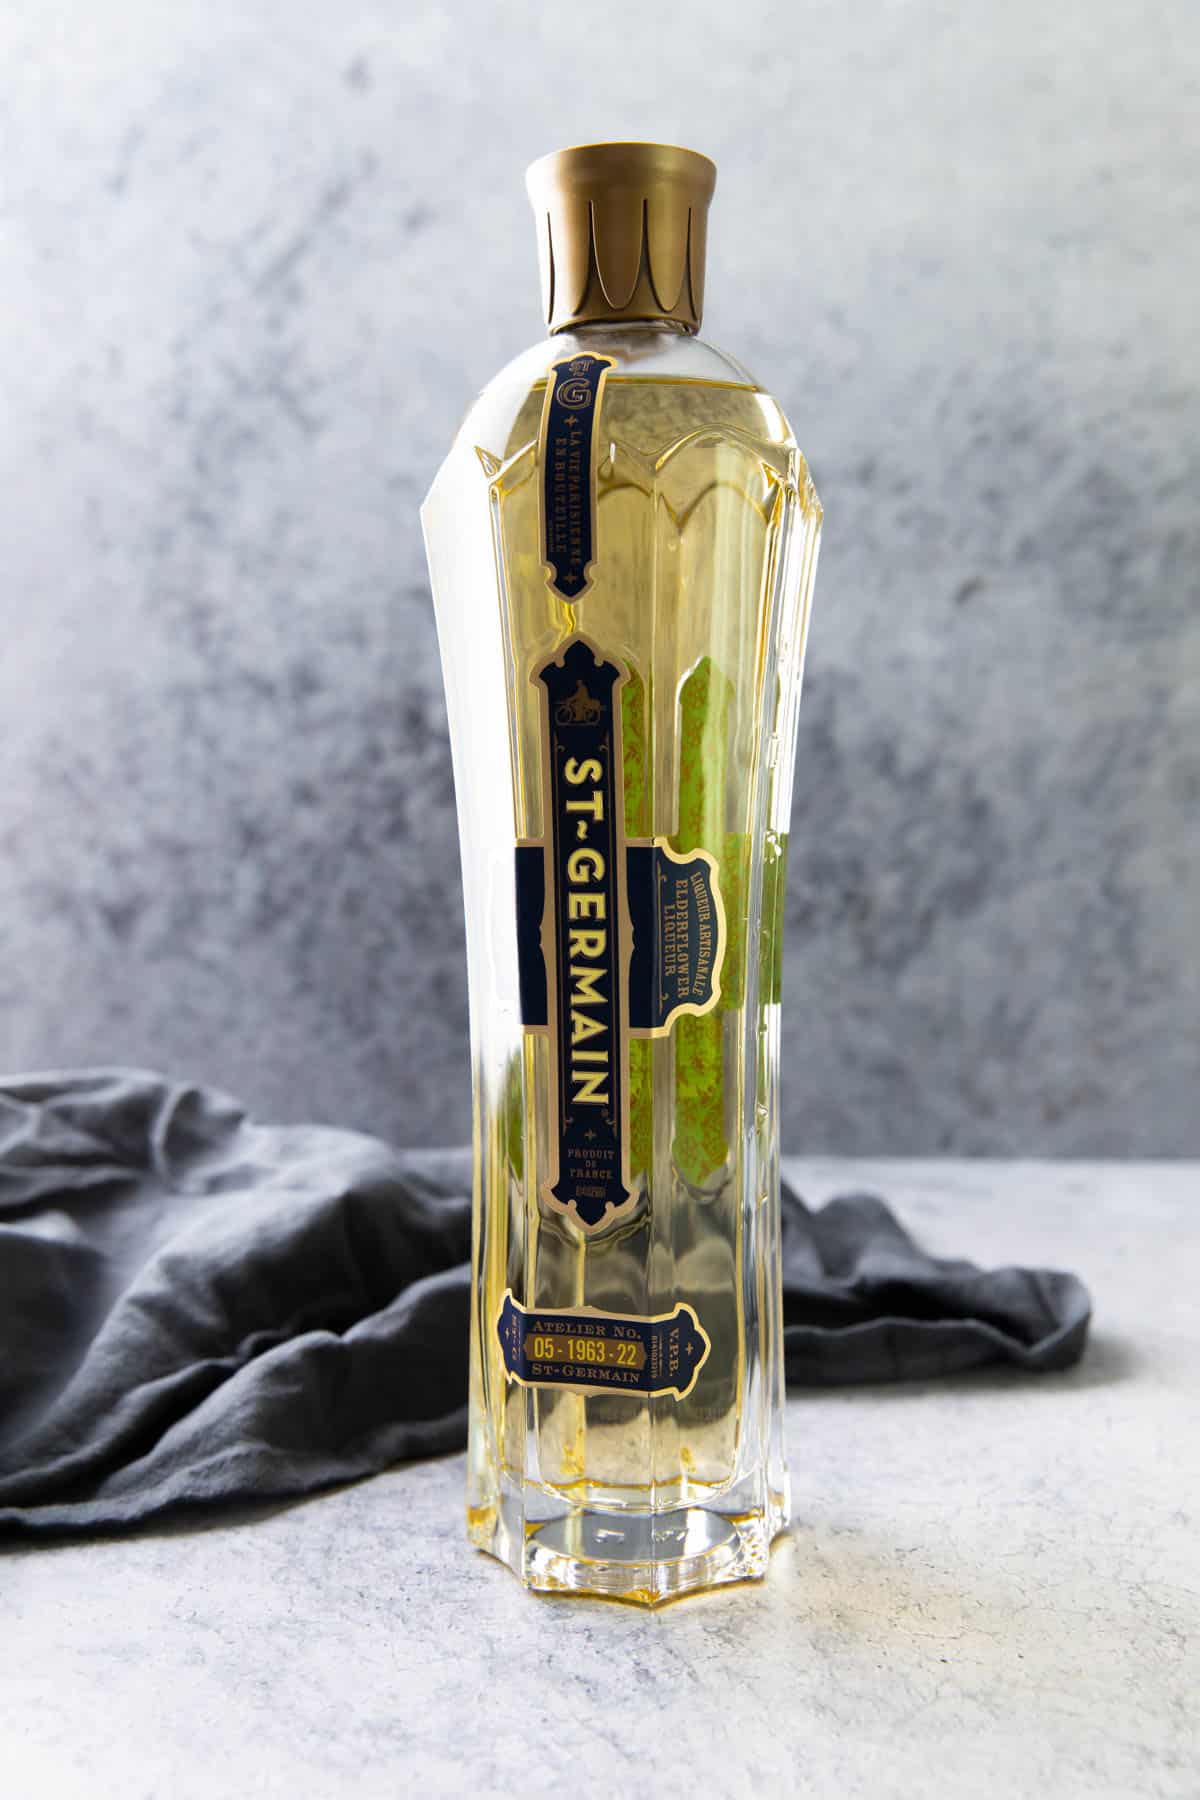 Bottle of St Germain, a key ingredient in making this cocktail